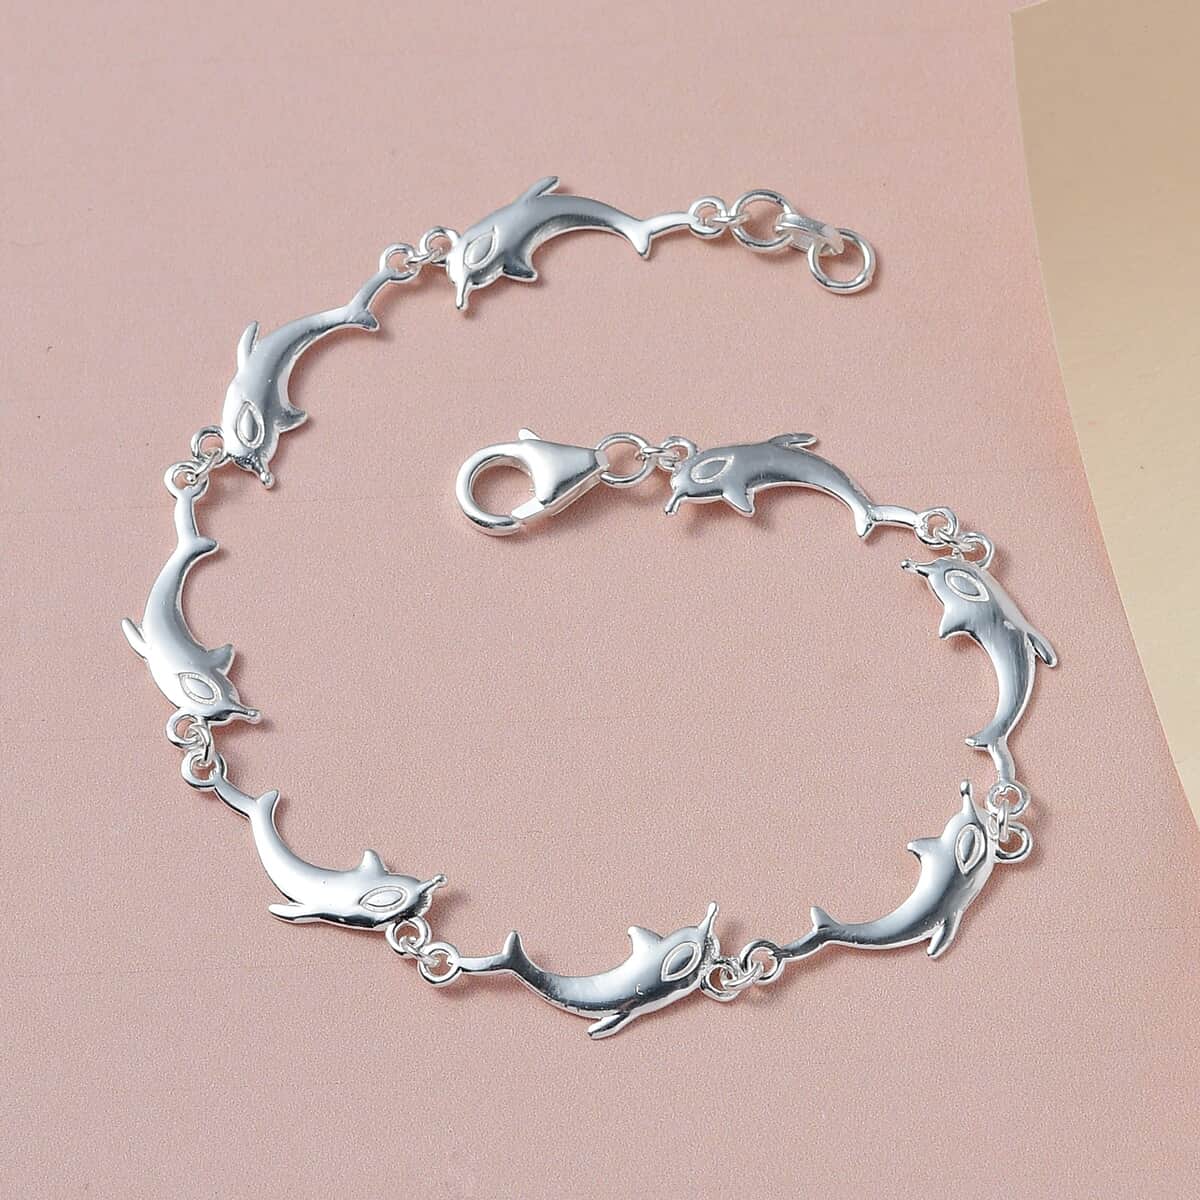 Dolphin Link Charm Bracelet For Women in Sterling Silver, Ocean Jewelry Beach Gifts Size 7.25 Inches (7.25 In) image number 3